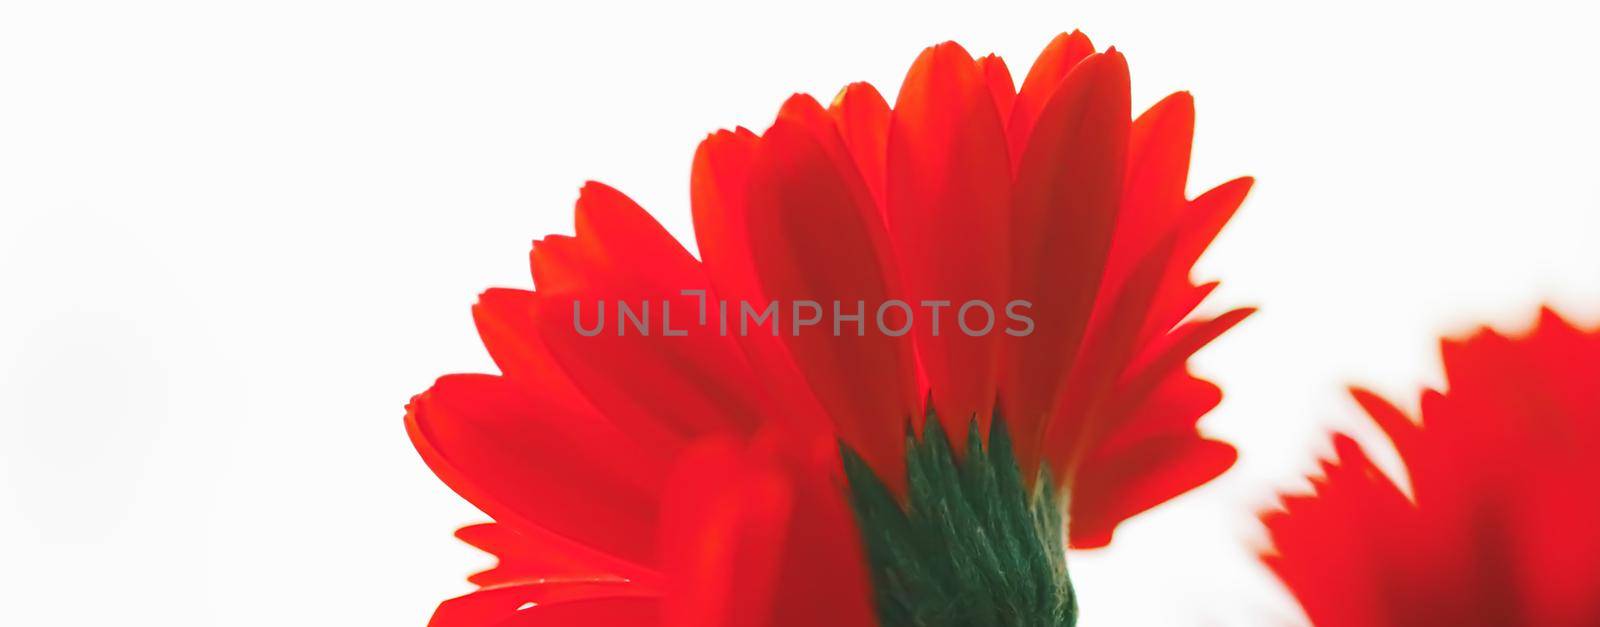 Red daisy flower isolated on white background, floral art and beauty in nature by Anneleven